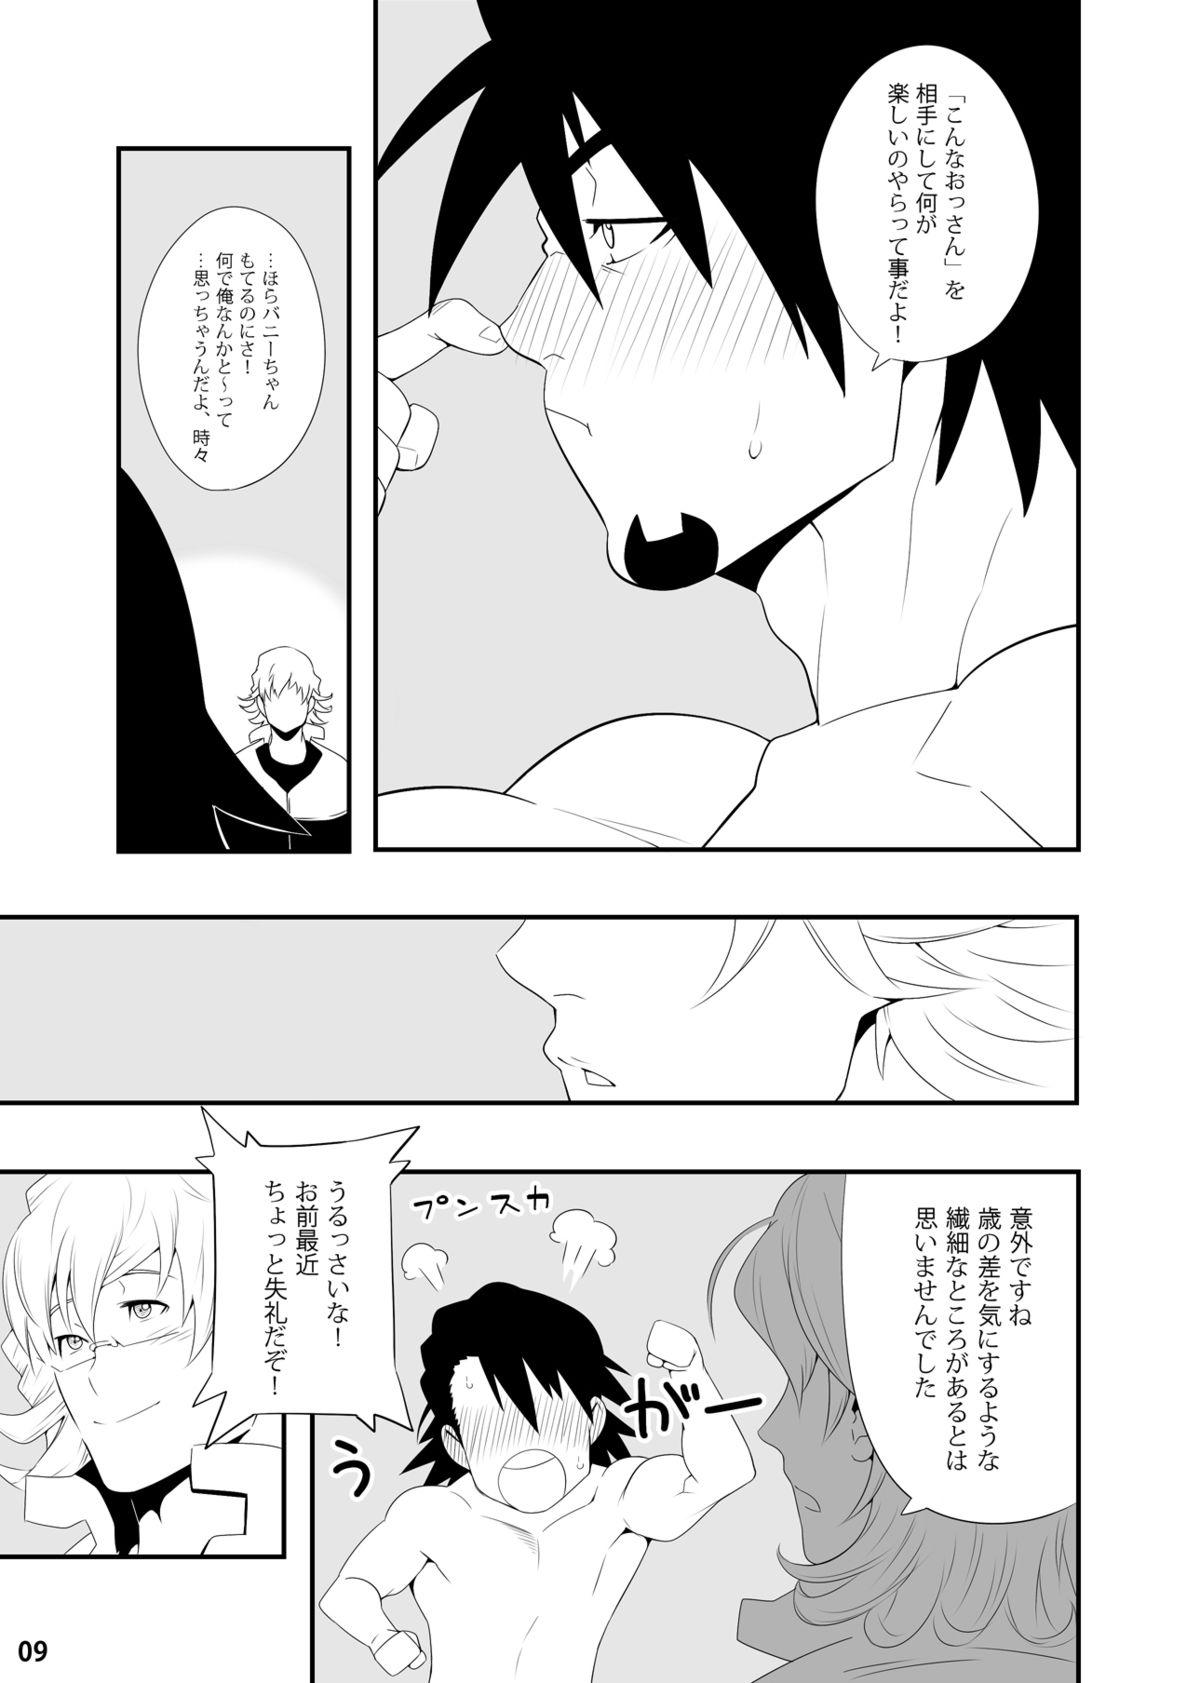 Reality T.B. Confidential - Tiger and bunny White Girl - Page 8